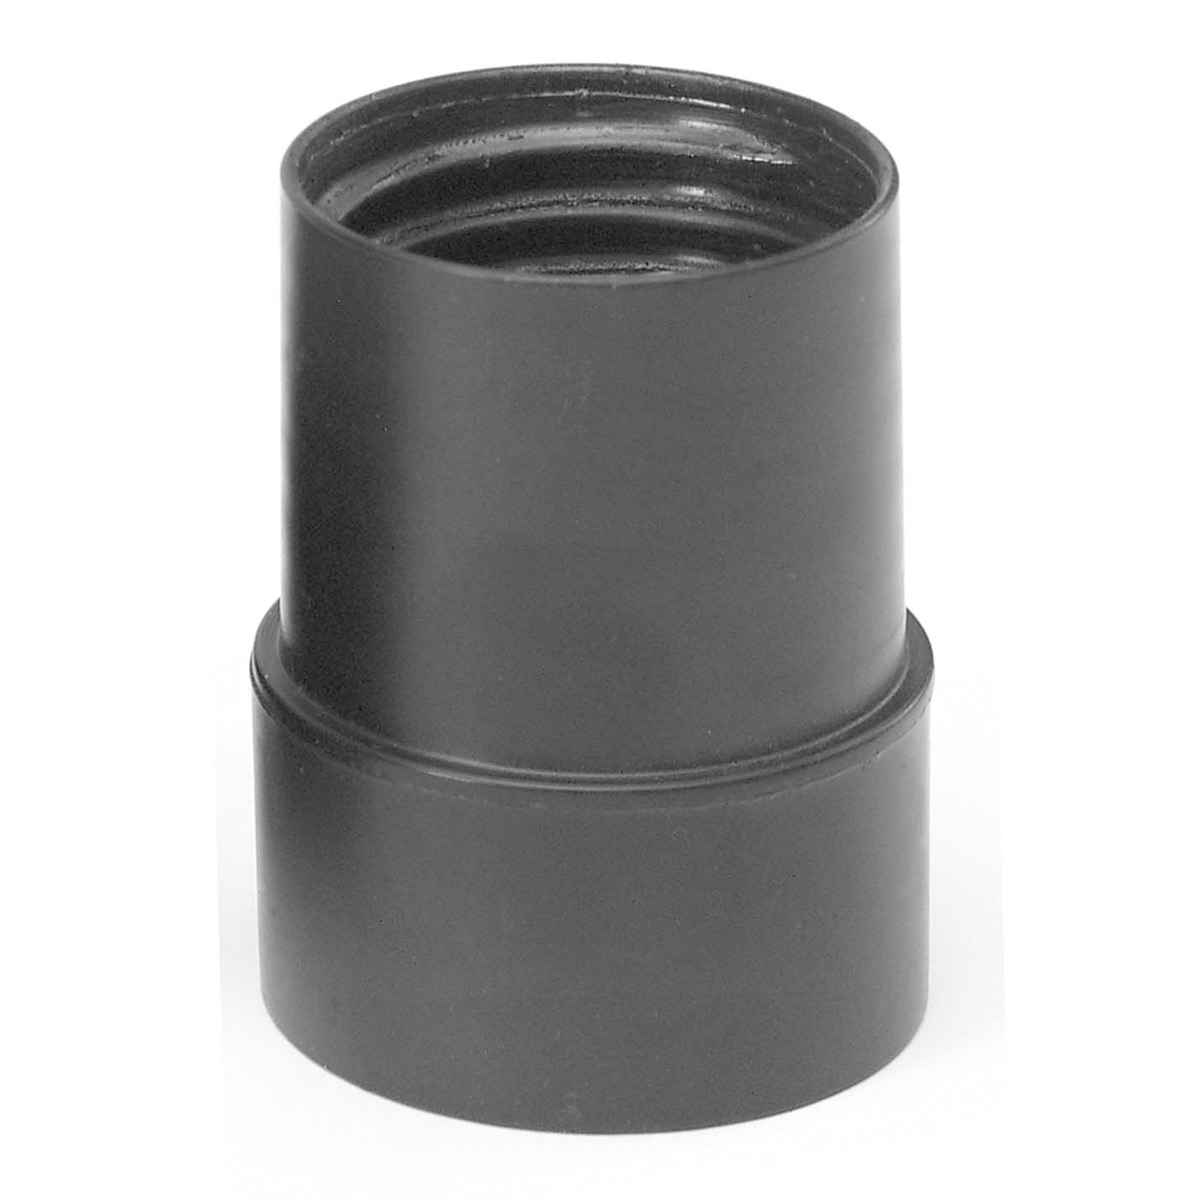 MR. NOZZLE WET/DRY VAC TANK ADAPTER 1-1/2 HOSE TO 2-1/4 I.D. OPENING -  MN05